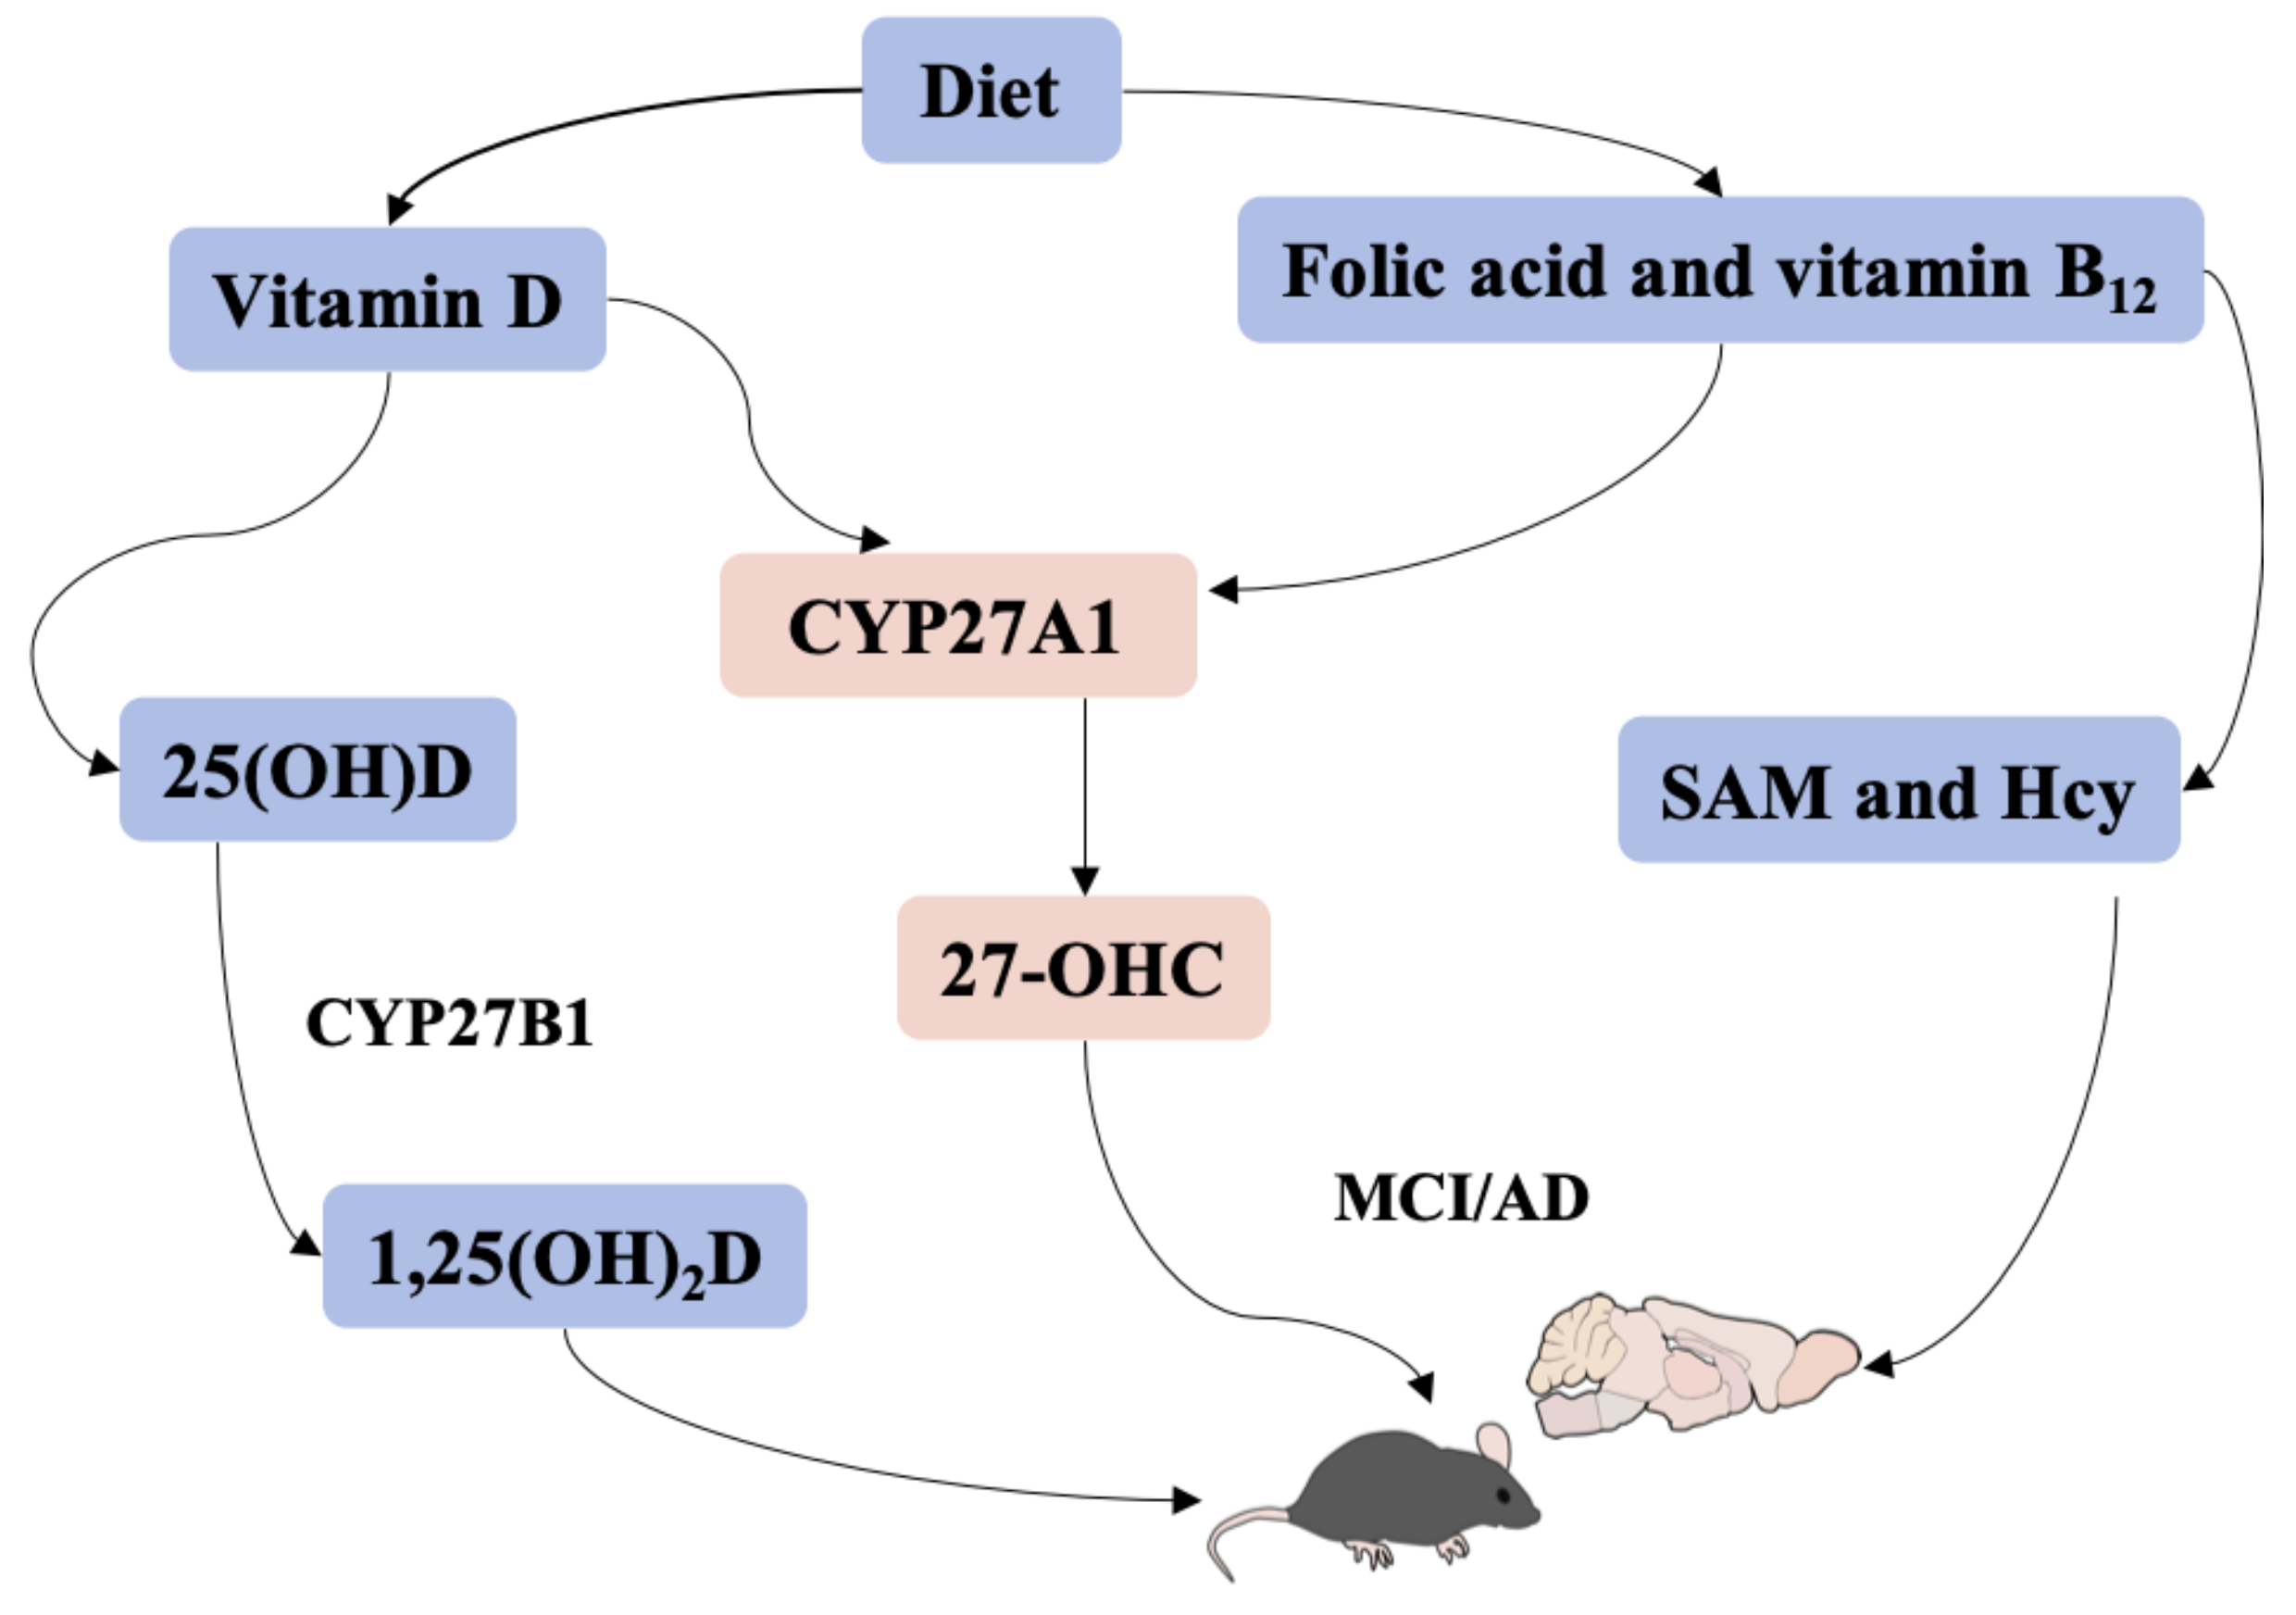 Nutrients | Free Full-Text | Vitamin D, Folic Acid and Vitamin B12 Can  Reverse Vitamin D Deficiency-Induced Learning and Memory Impairment by  Altering 27-Hydroxycholesterol and S-Adenosylmethionine